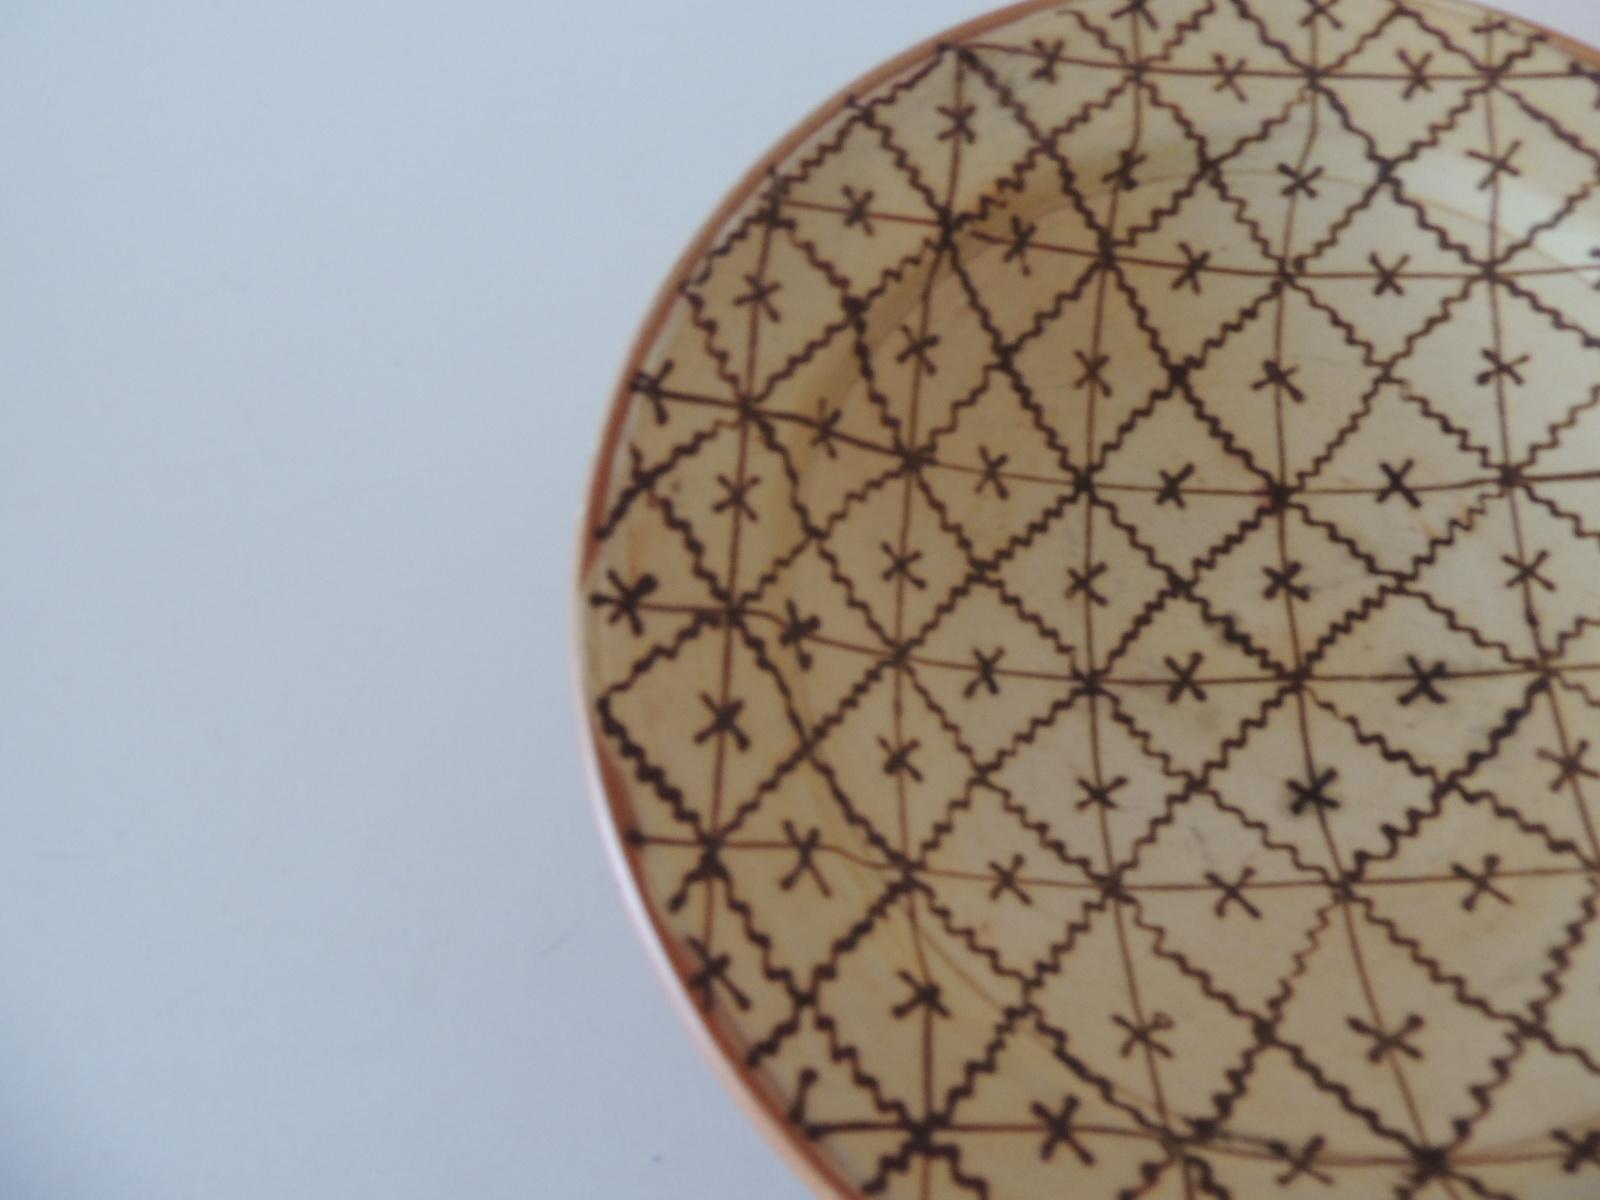 Brown and tan graphic terracotta round decorative plate,
Hanging hole in the back.
Size: 8.5